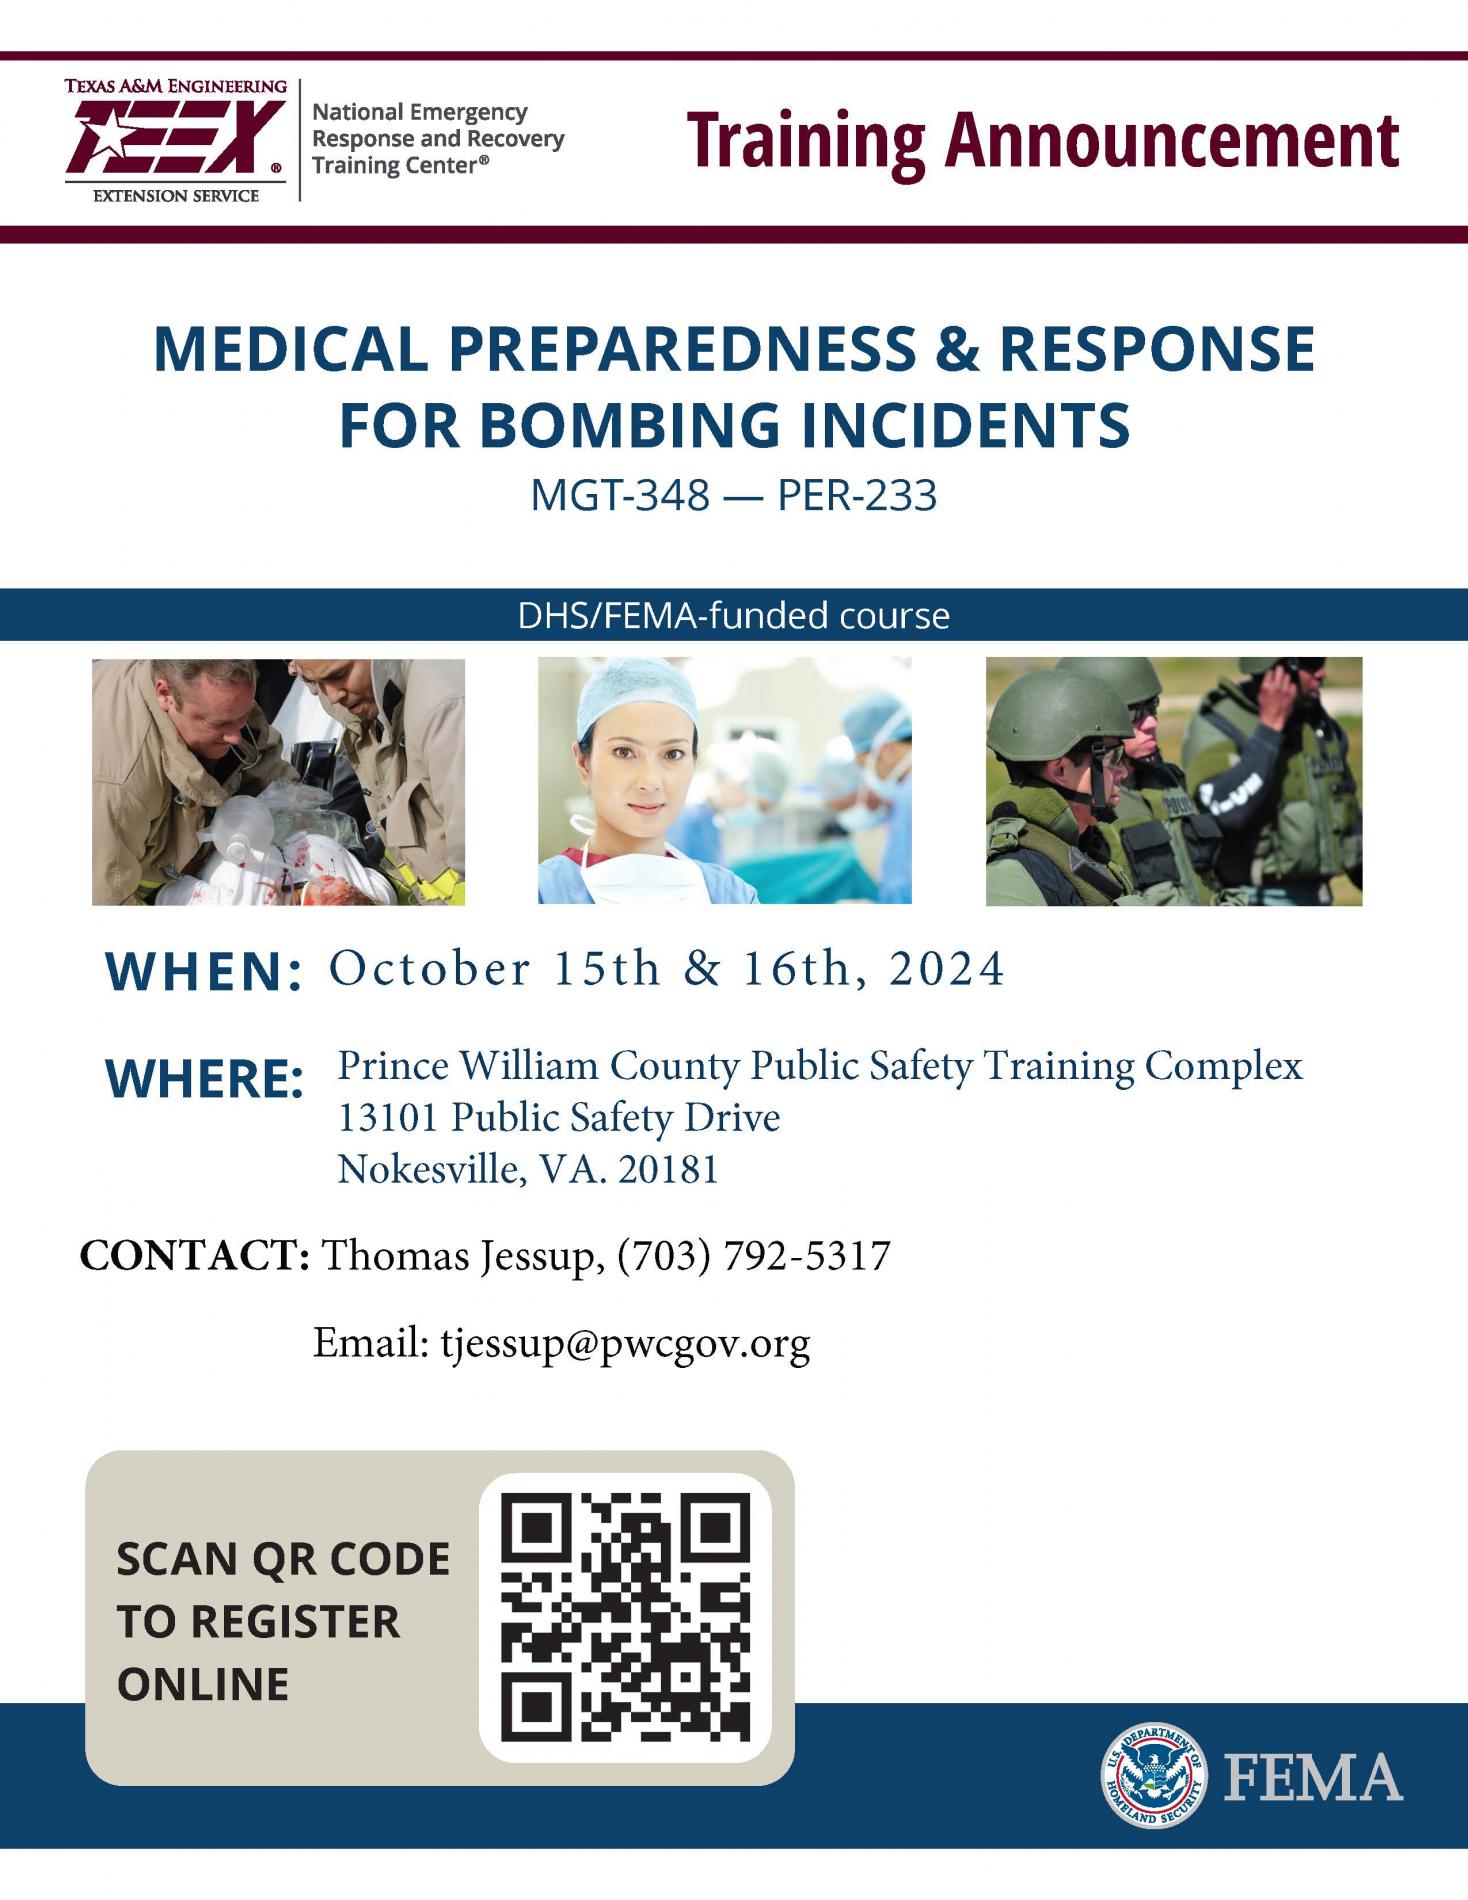 Flier to register for Medical Preparedness & Response for Bombing Incidents course